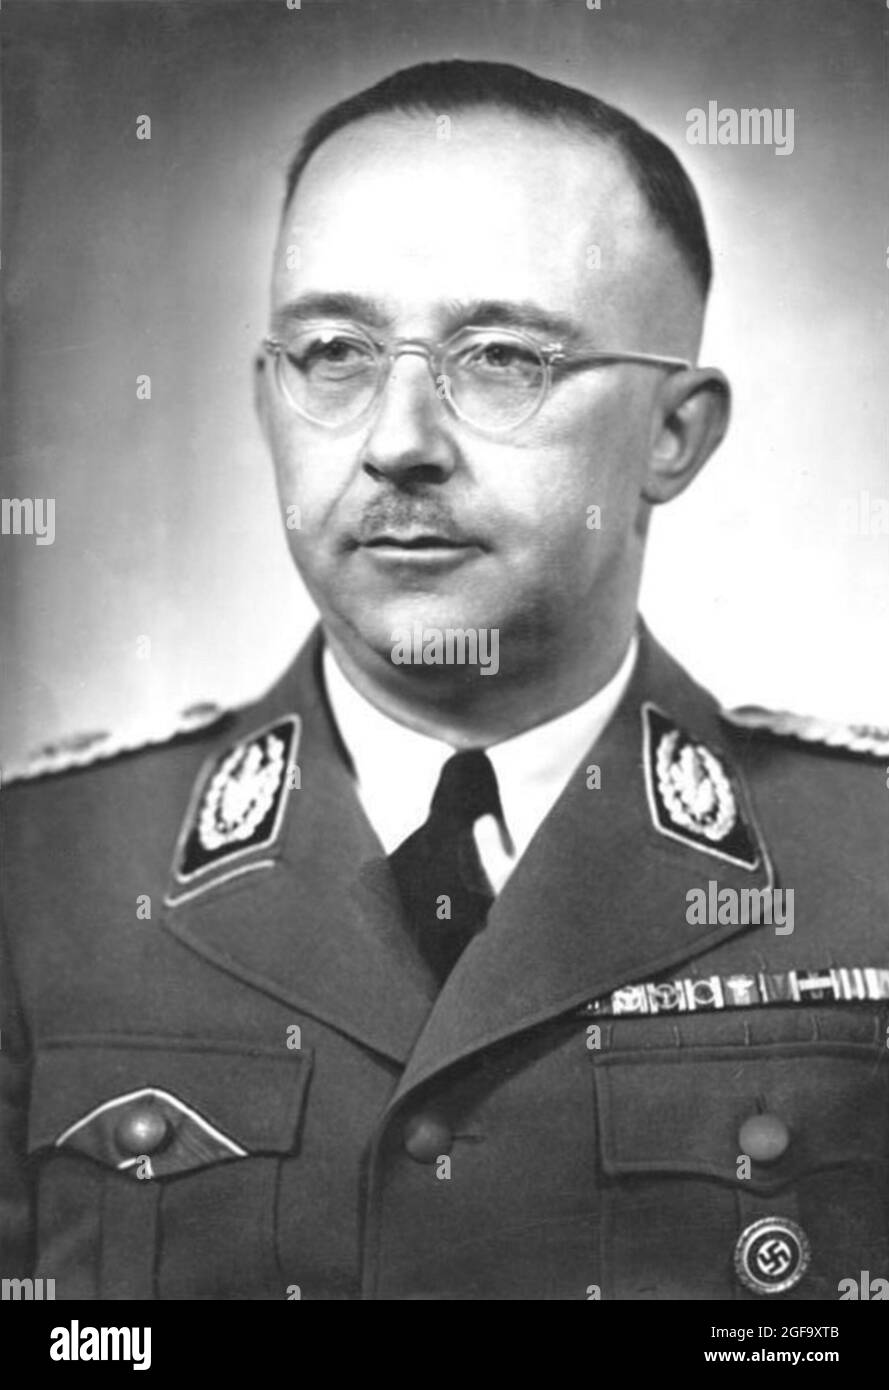 A portrait of Nazi leaderand head of the SS Heinrich Himmler. He was captured in 1945 and committed suicide in captivity. Credit: German Bundesarchiv Stock Photo